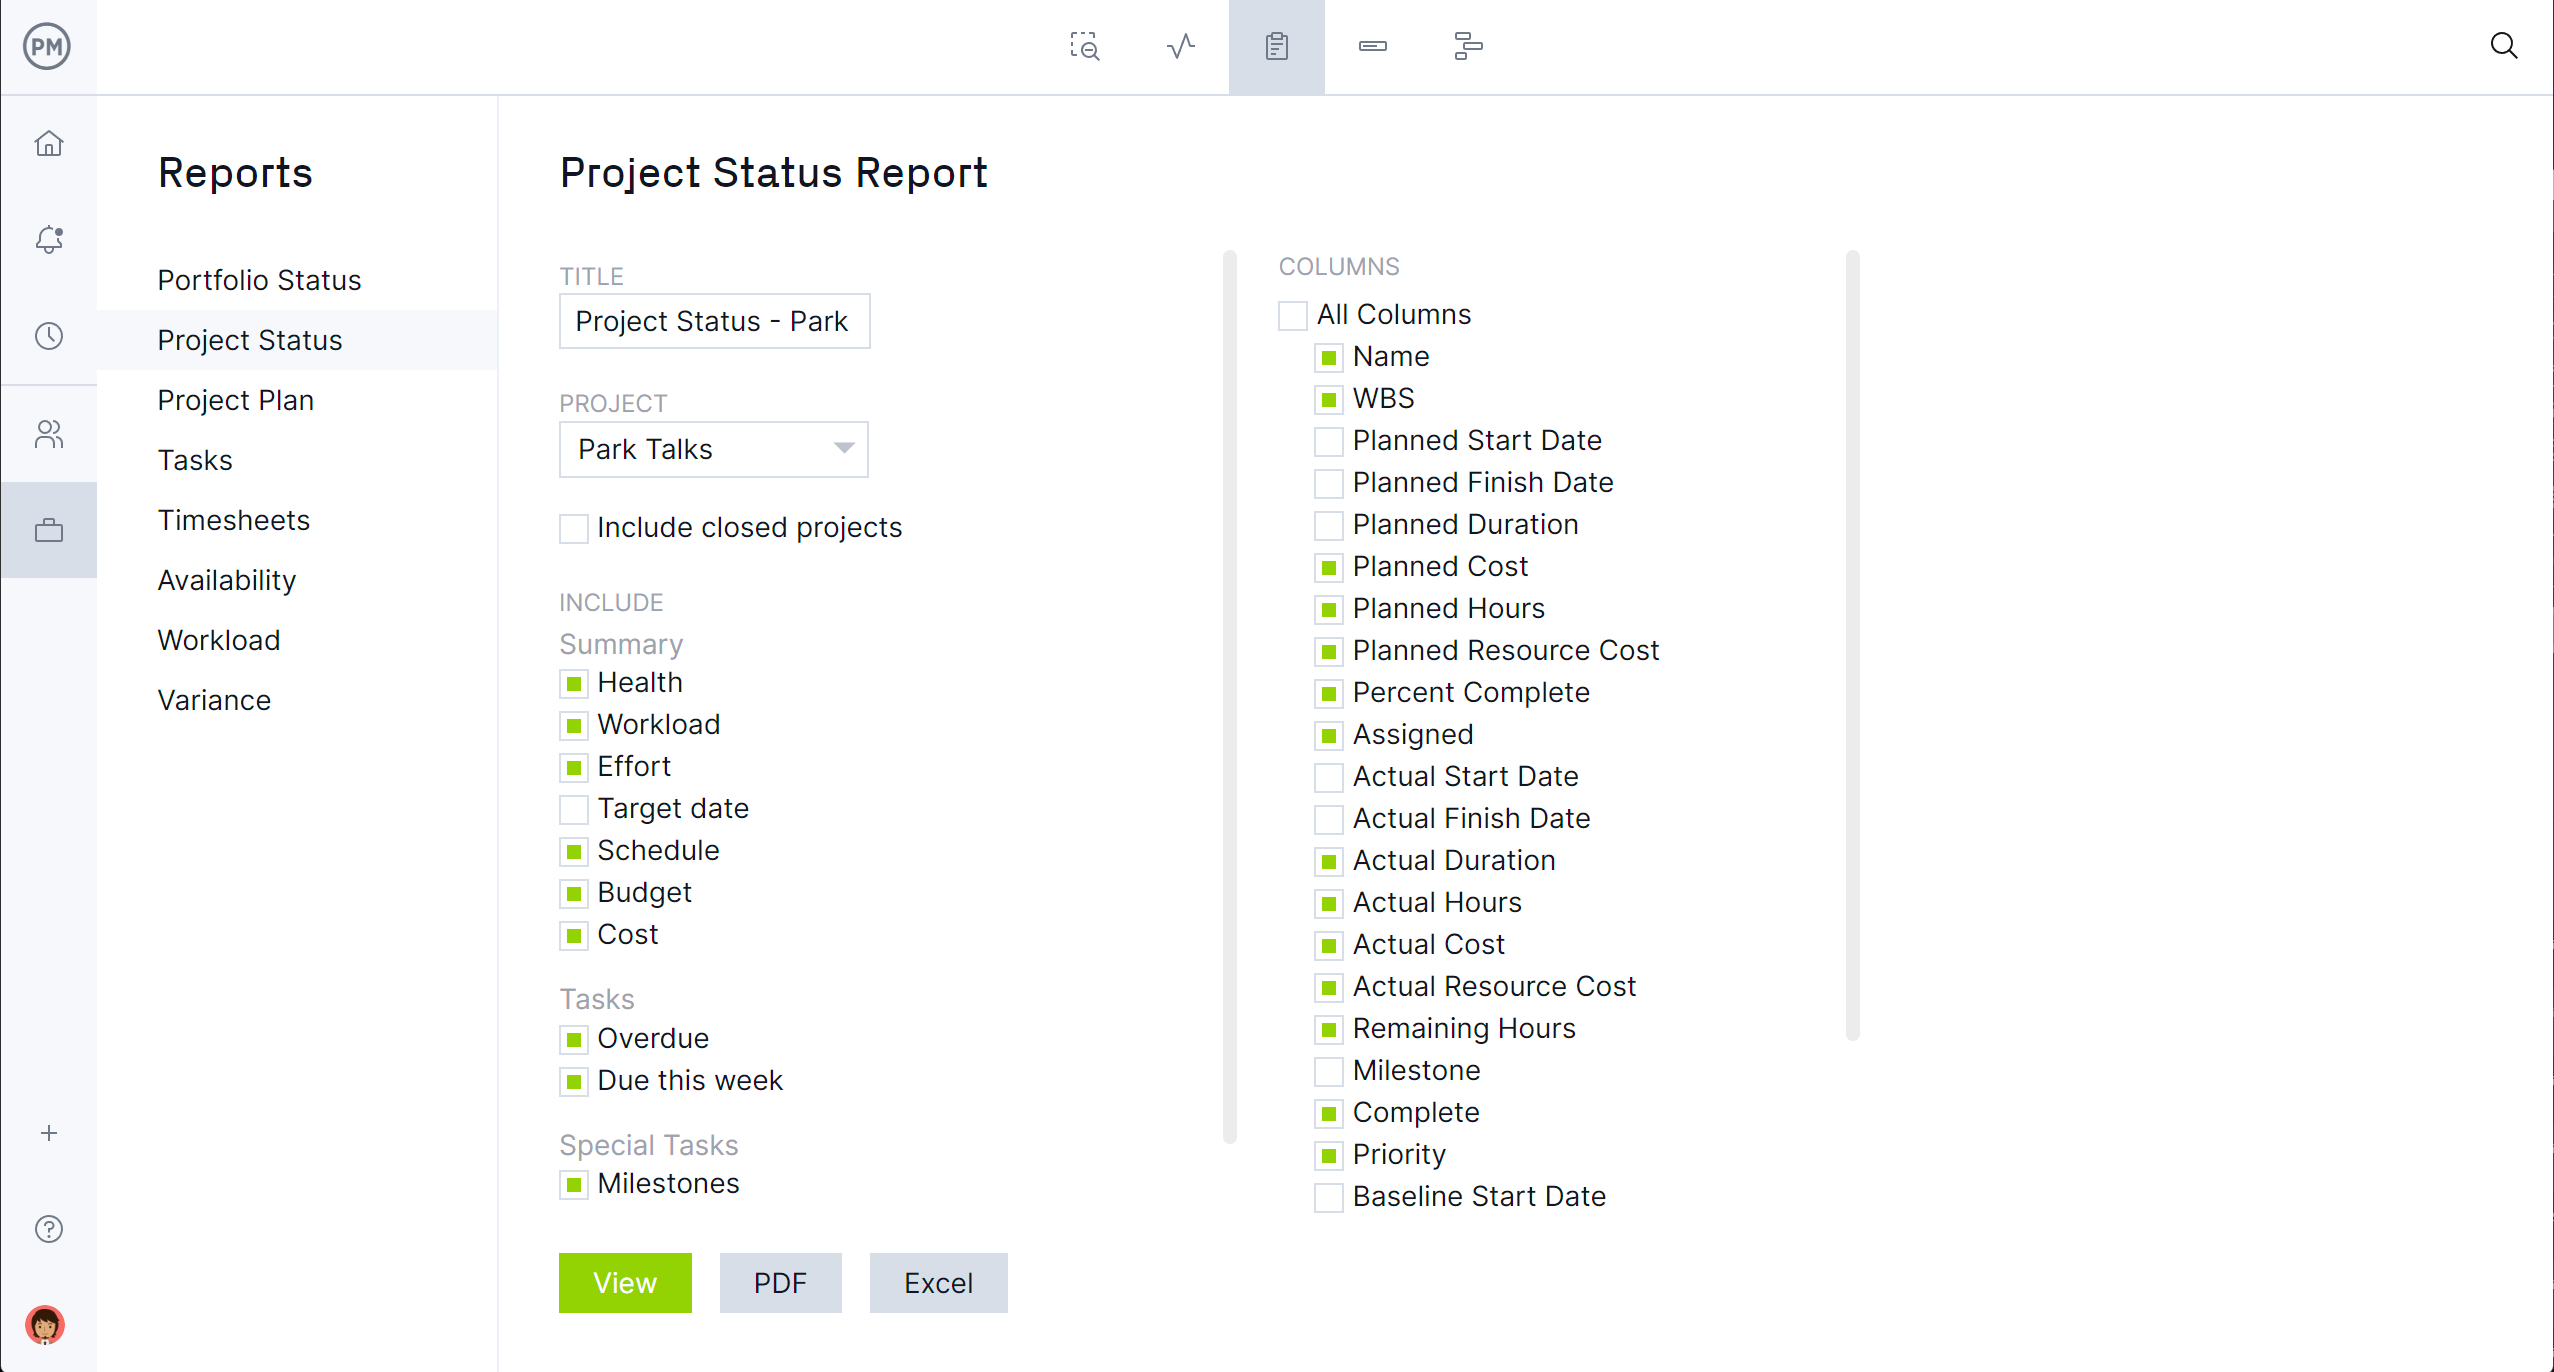 ProjectManager's status report filter